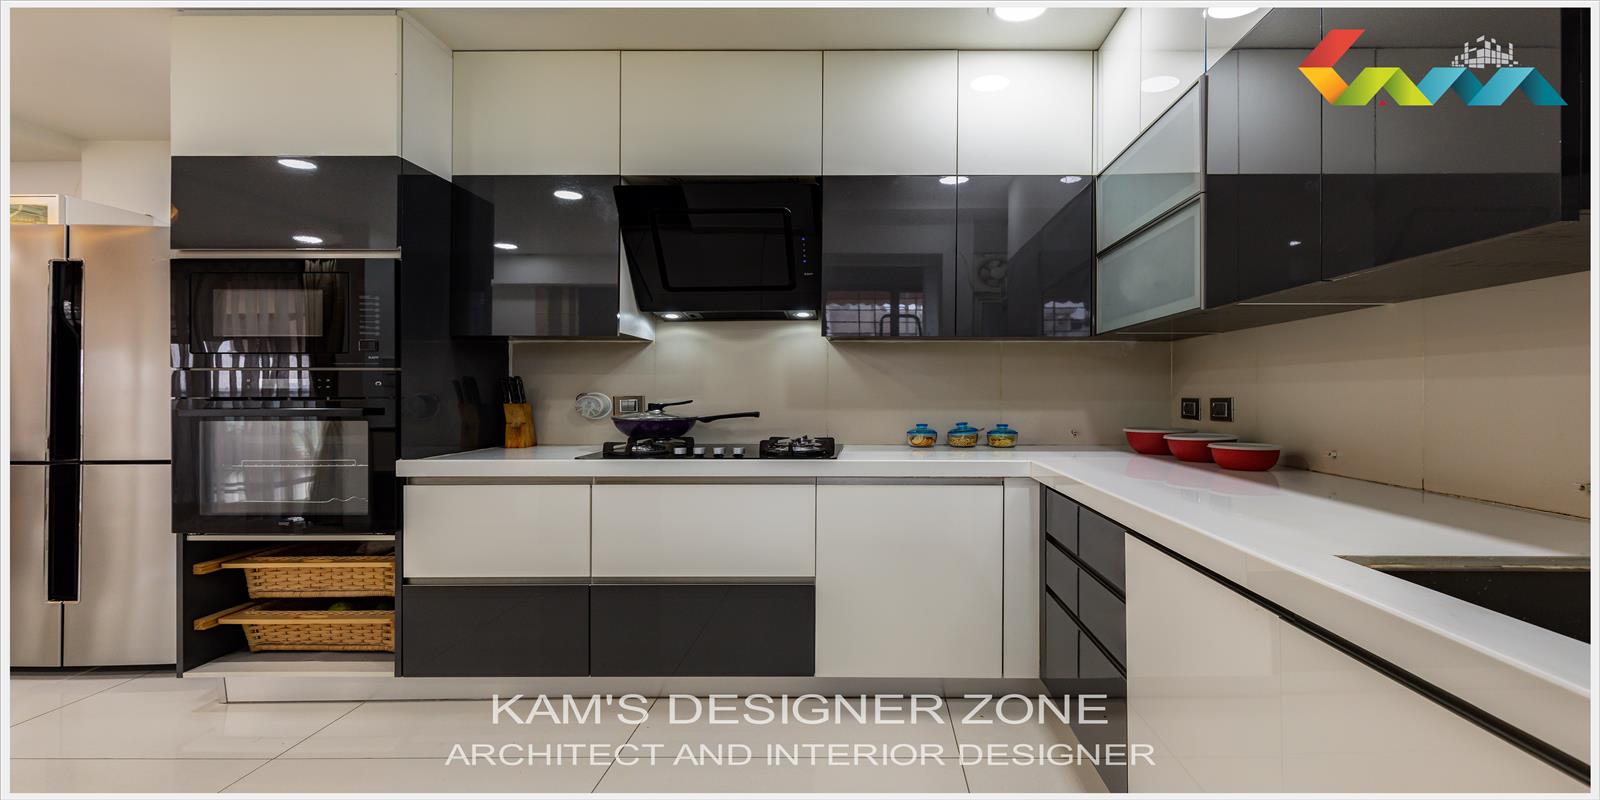 A L-Shape Modular Kitchen With Black and White Cabinets.
                  